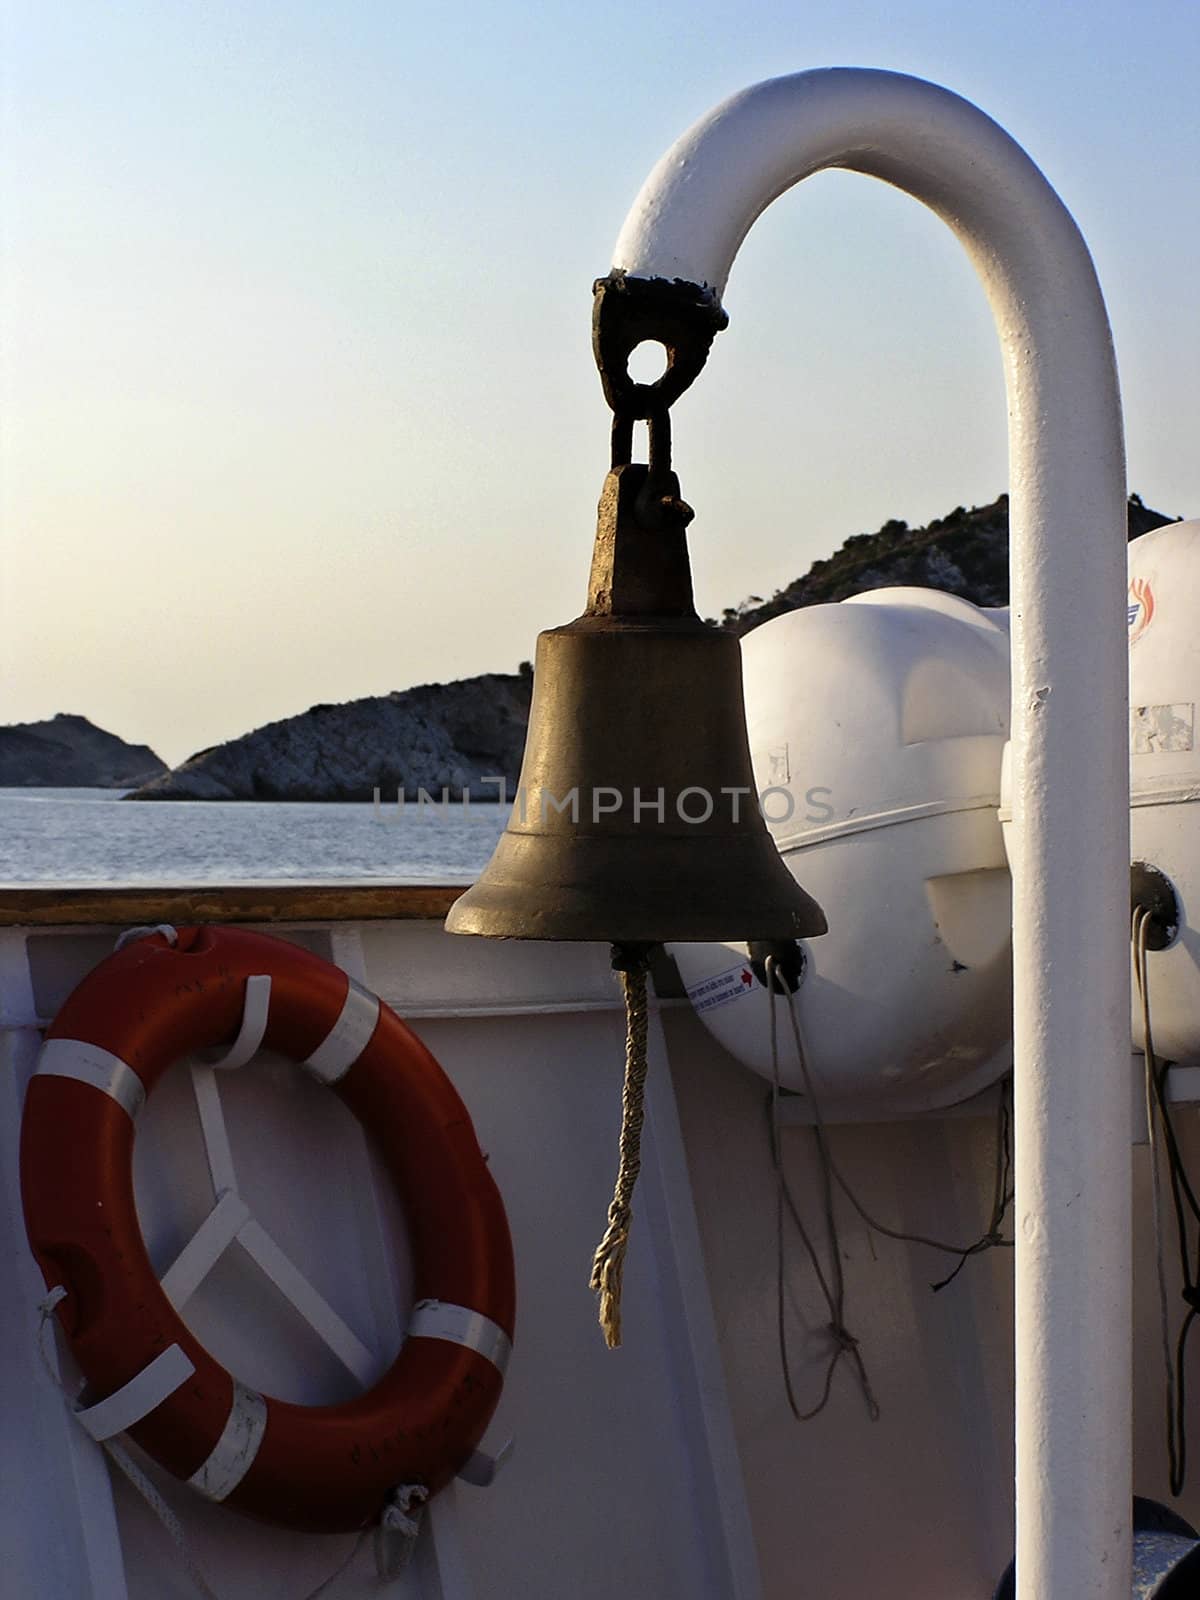 Ship bell and life guard equipment.